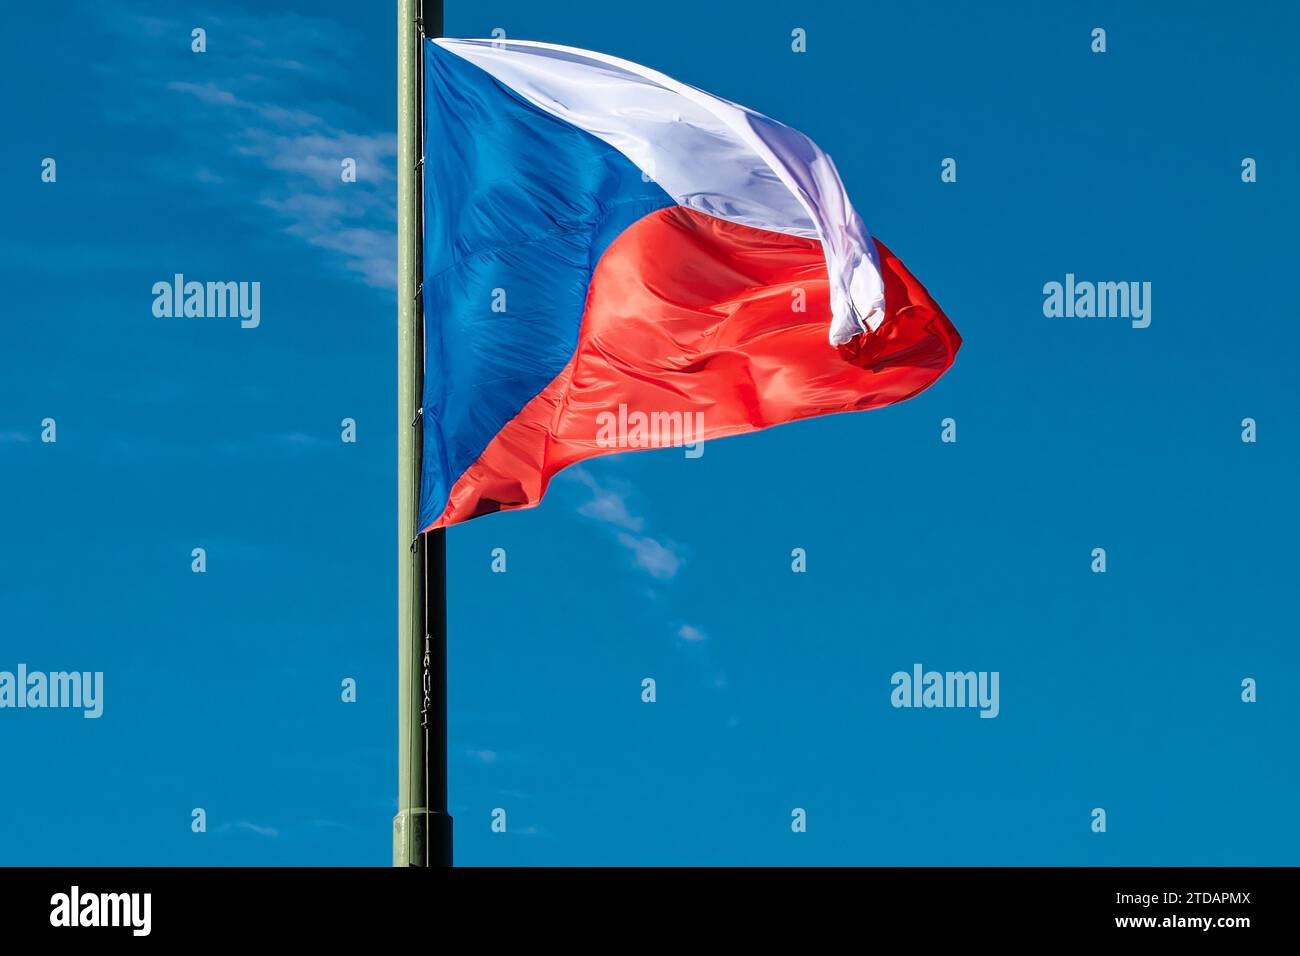 A photo of the Czech Republic flag flying on a flagpole with a blue sky in the background. Stock Photo